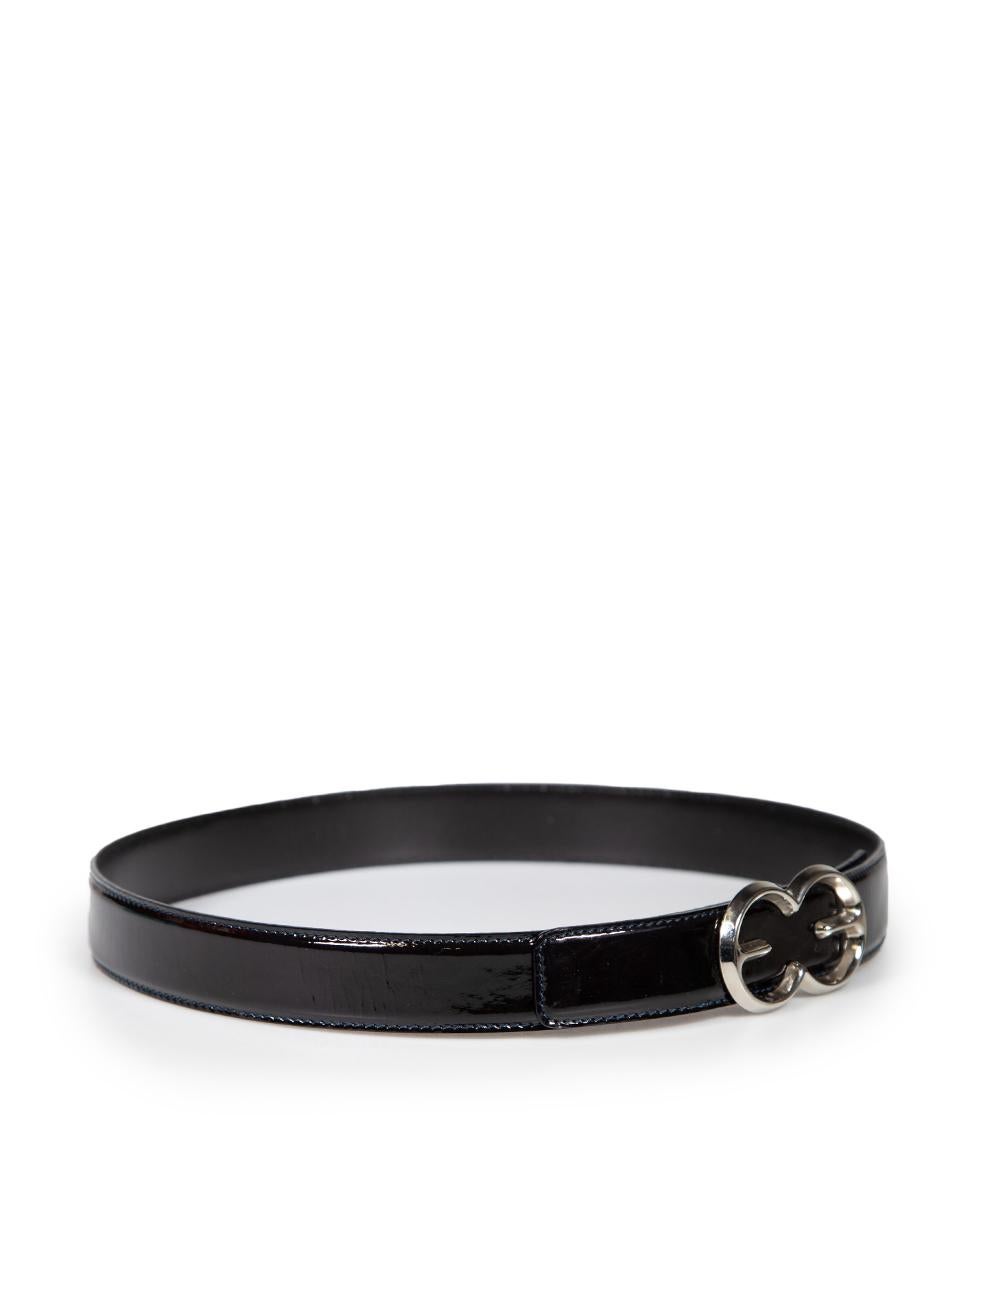 CONDITION is Very good. Minimal wear to belt is evident. Minimal tarnishing to metal buckle on this used Escada designer resale item.
 
 
 
 Details
 
 
 Black
 
 Patent leather
 
 Belt
 
 Silver logo buckle
 
 
 
 
 
 
 
 Composition
 
 EXTERIOR: